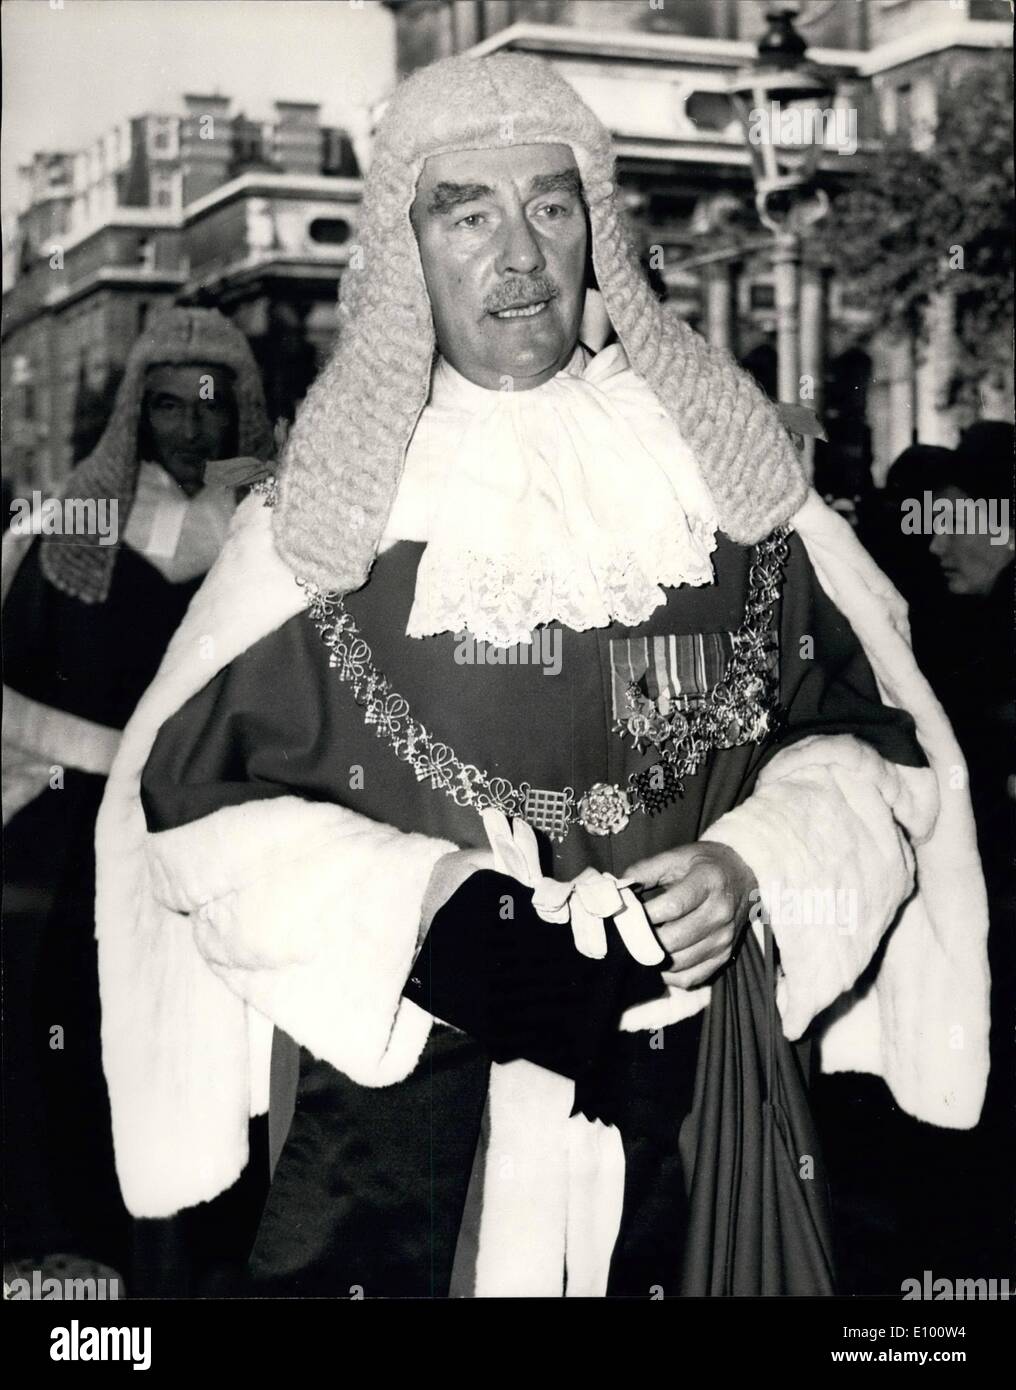 Feb. 02, 1972 - The Lord Chief Justice To Head The Inquiry Into Sunday's Shooting In Londonderry: Lord Widgery, the Lord Chief Justice, is to sit alone to head the inquiry into Sunday's shooting of 13 civilians in Londonderry. Photo shows Lord Widgery, the Lord Chief Justice who will head the Londonderry inquiry. Stock Photo